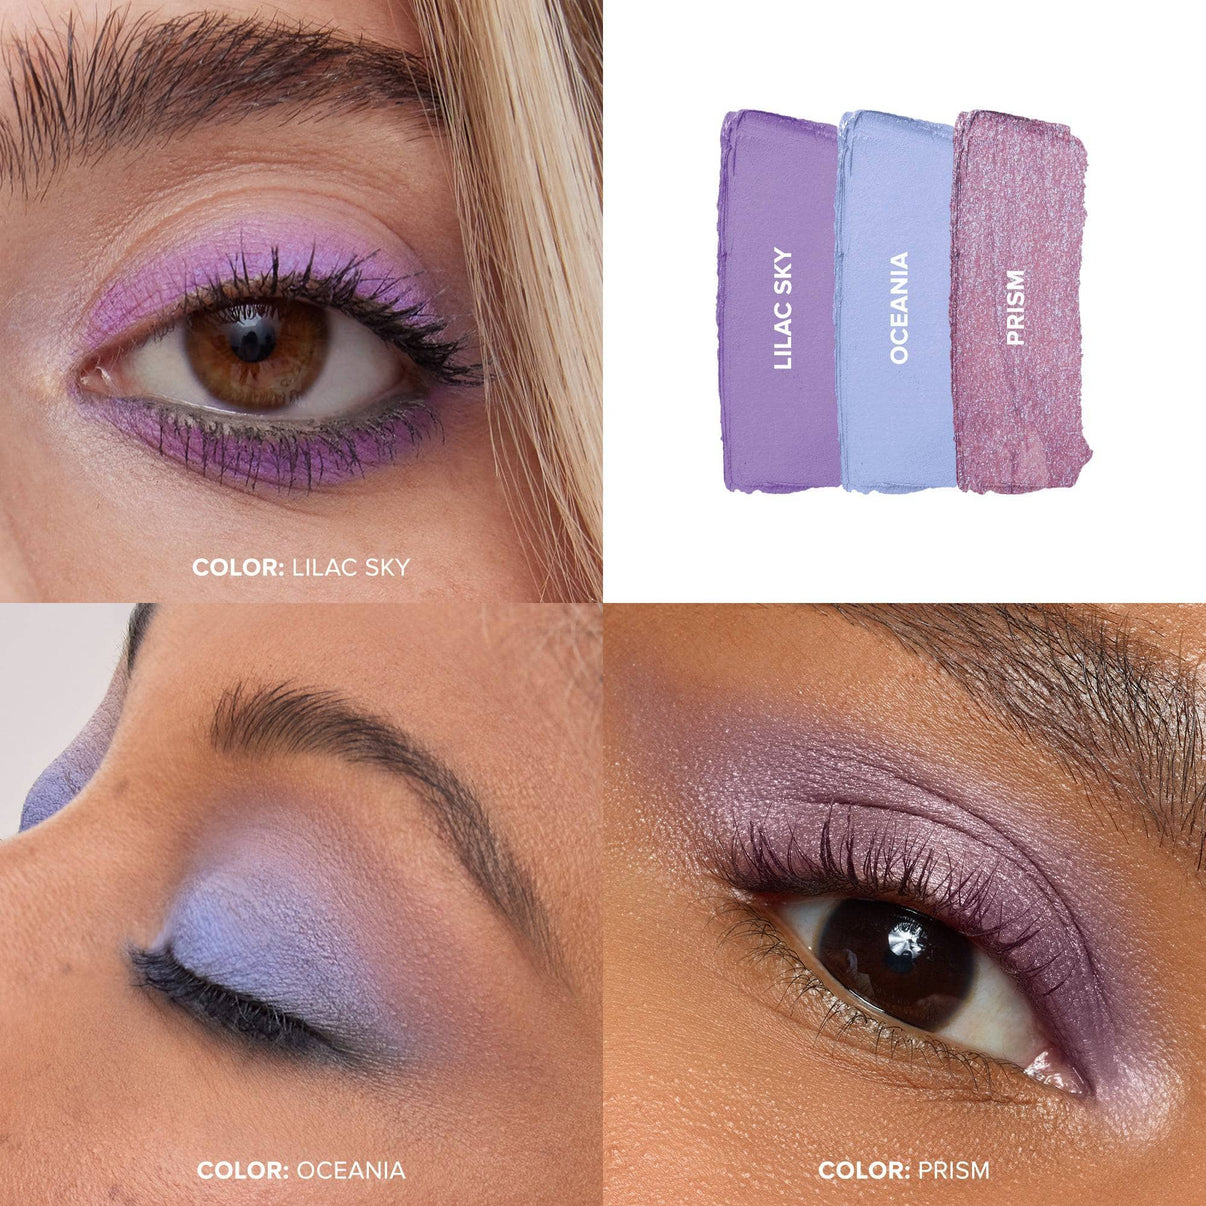 Grid with Dreamy Easy Eyes texture swatches and eye makeup